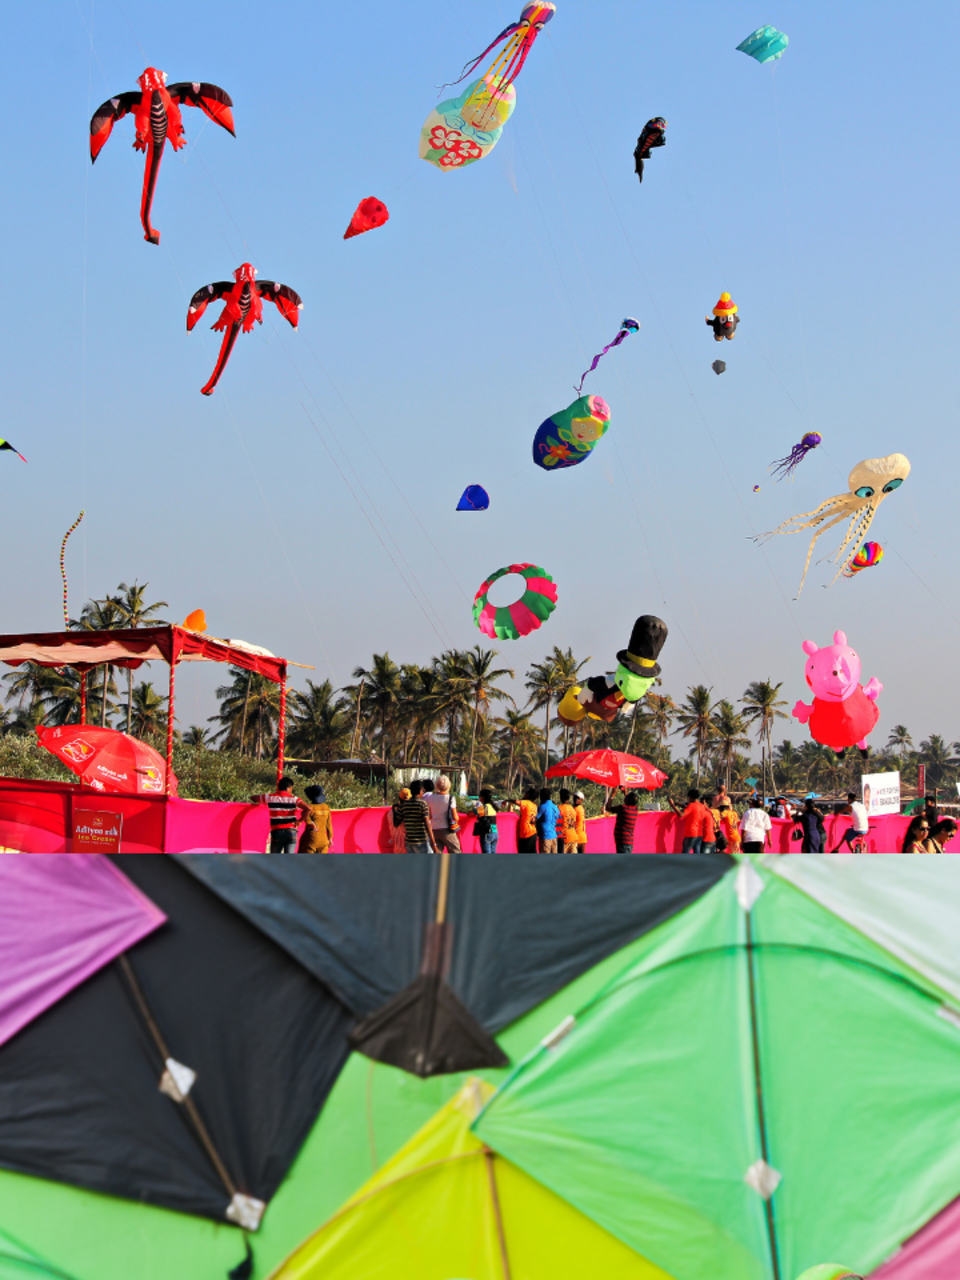 Belagavi International Kite Festival: All you need to know | Times Now